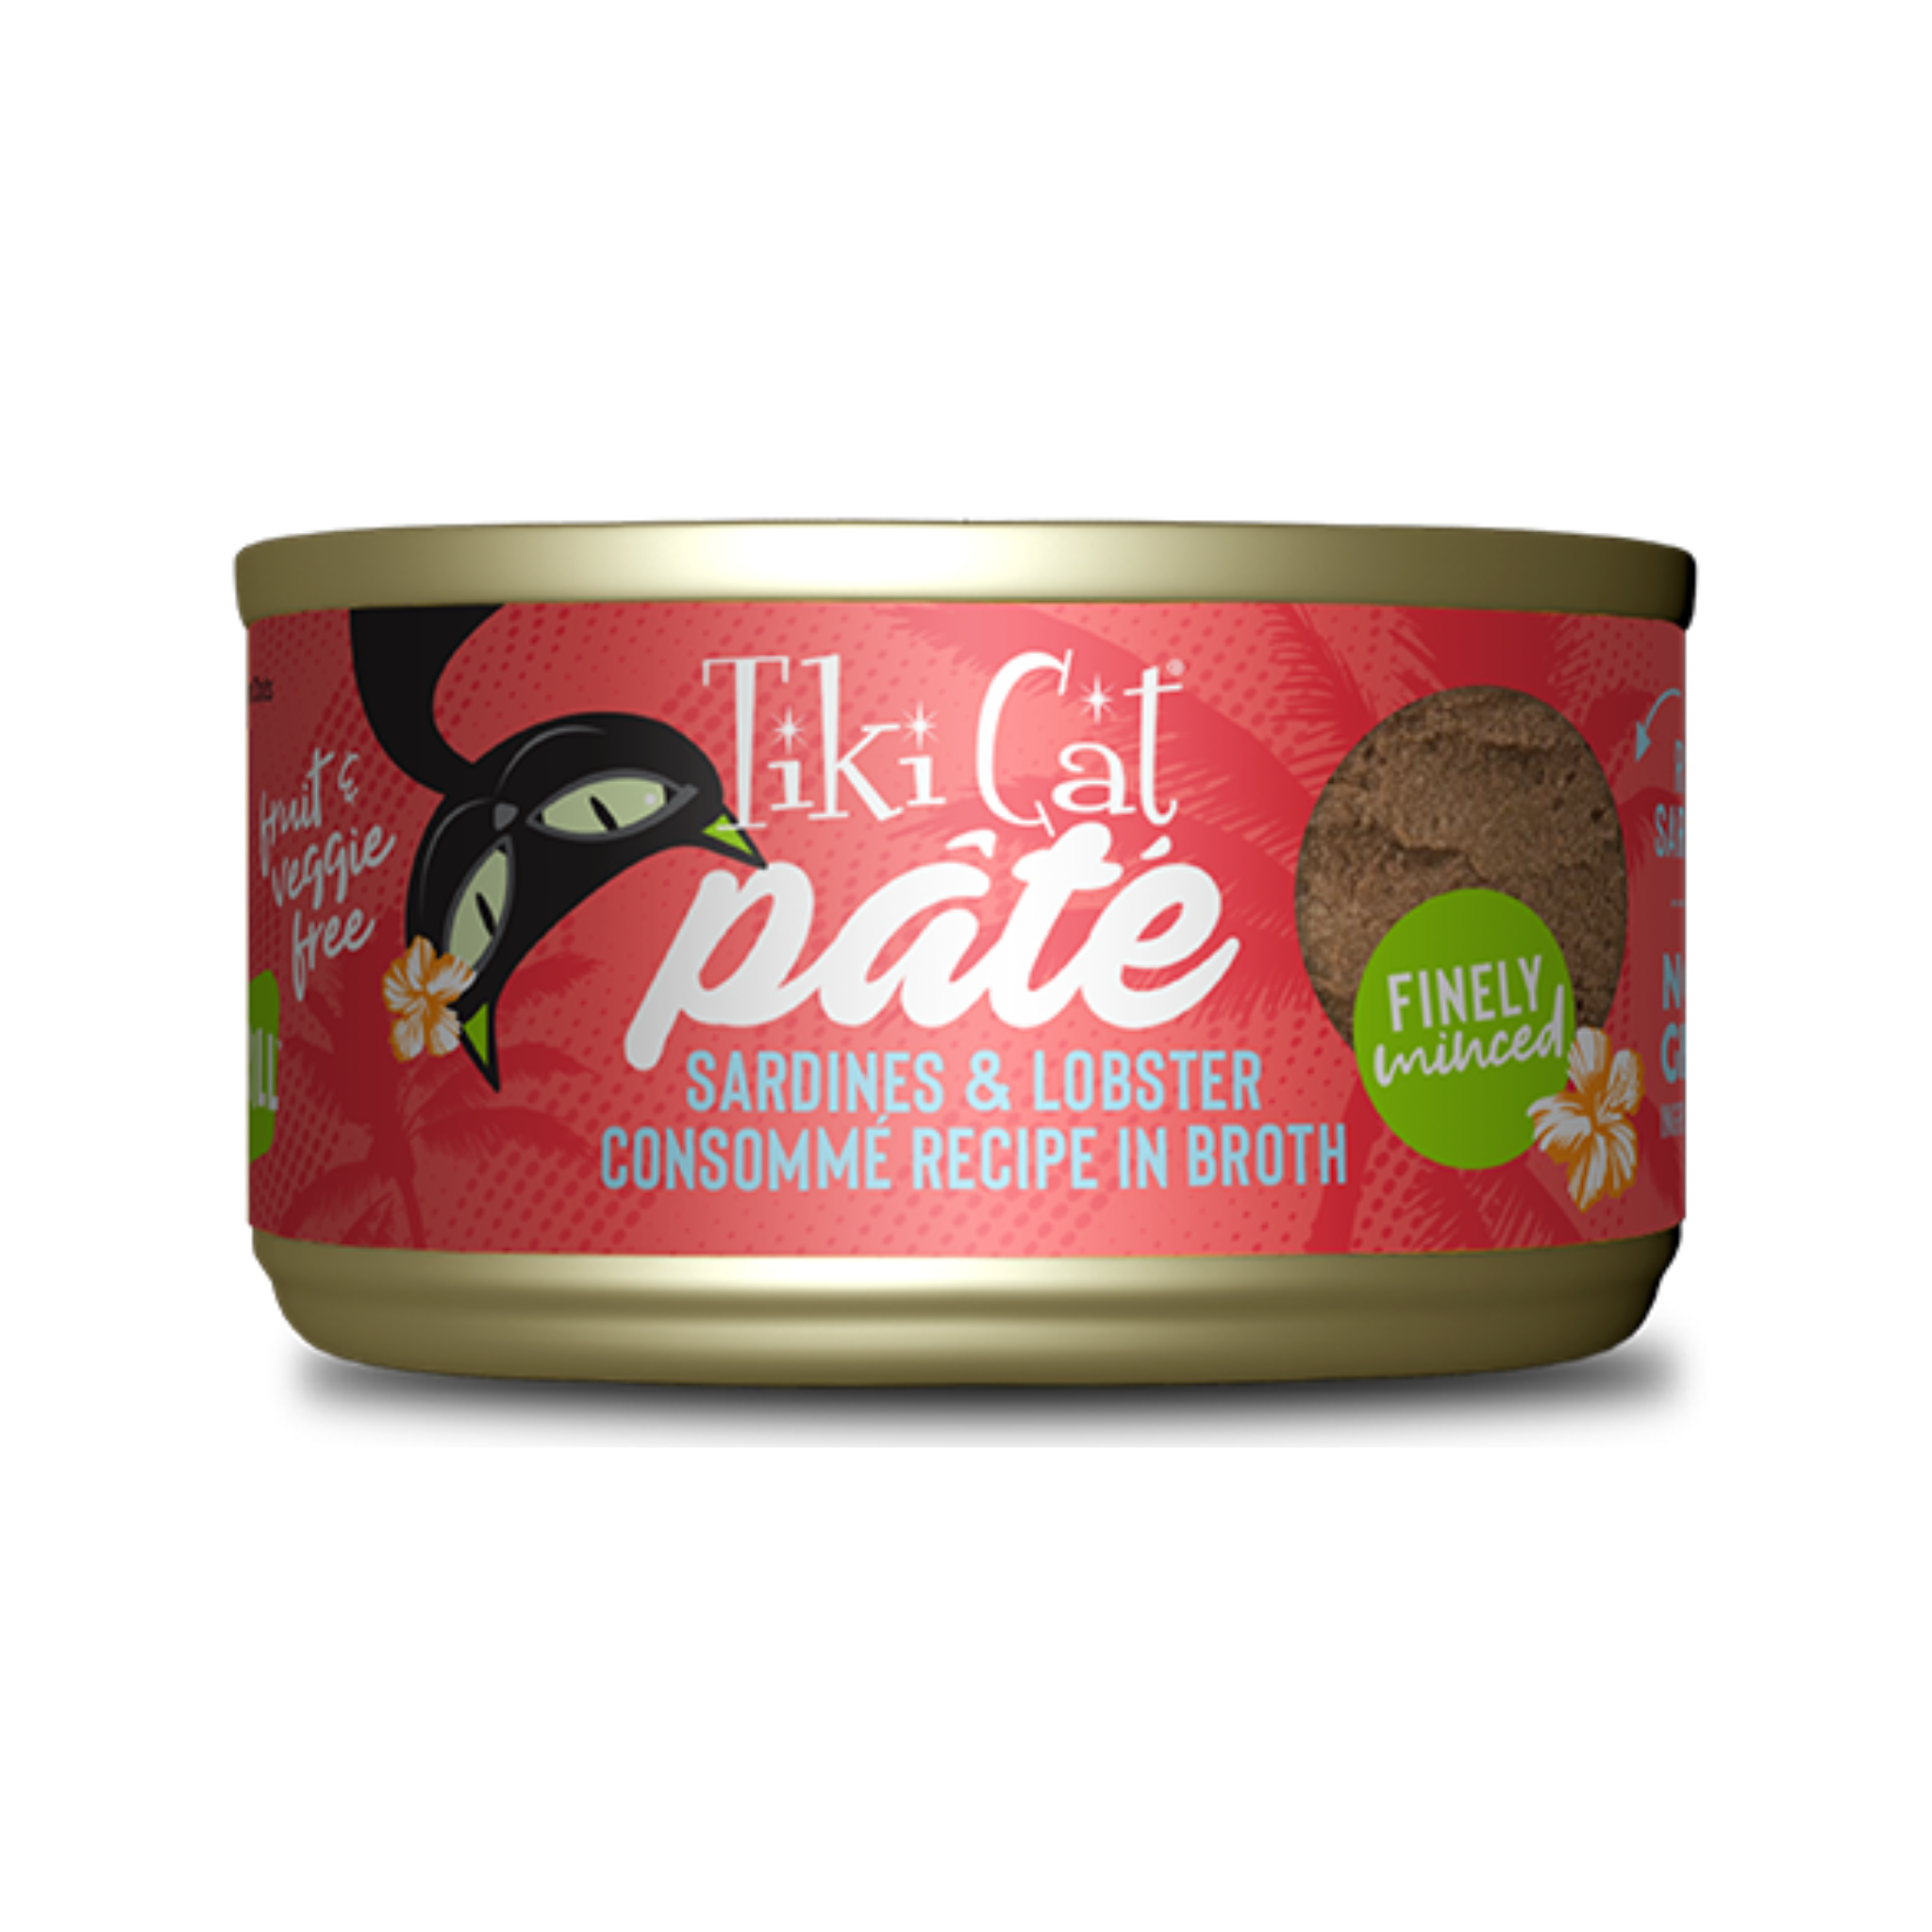 Tiki Grill Pate Sardine & Lobster Cat Canned